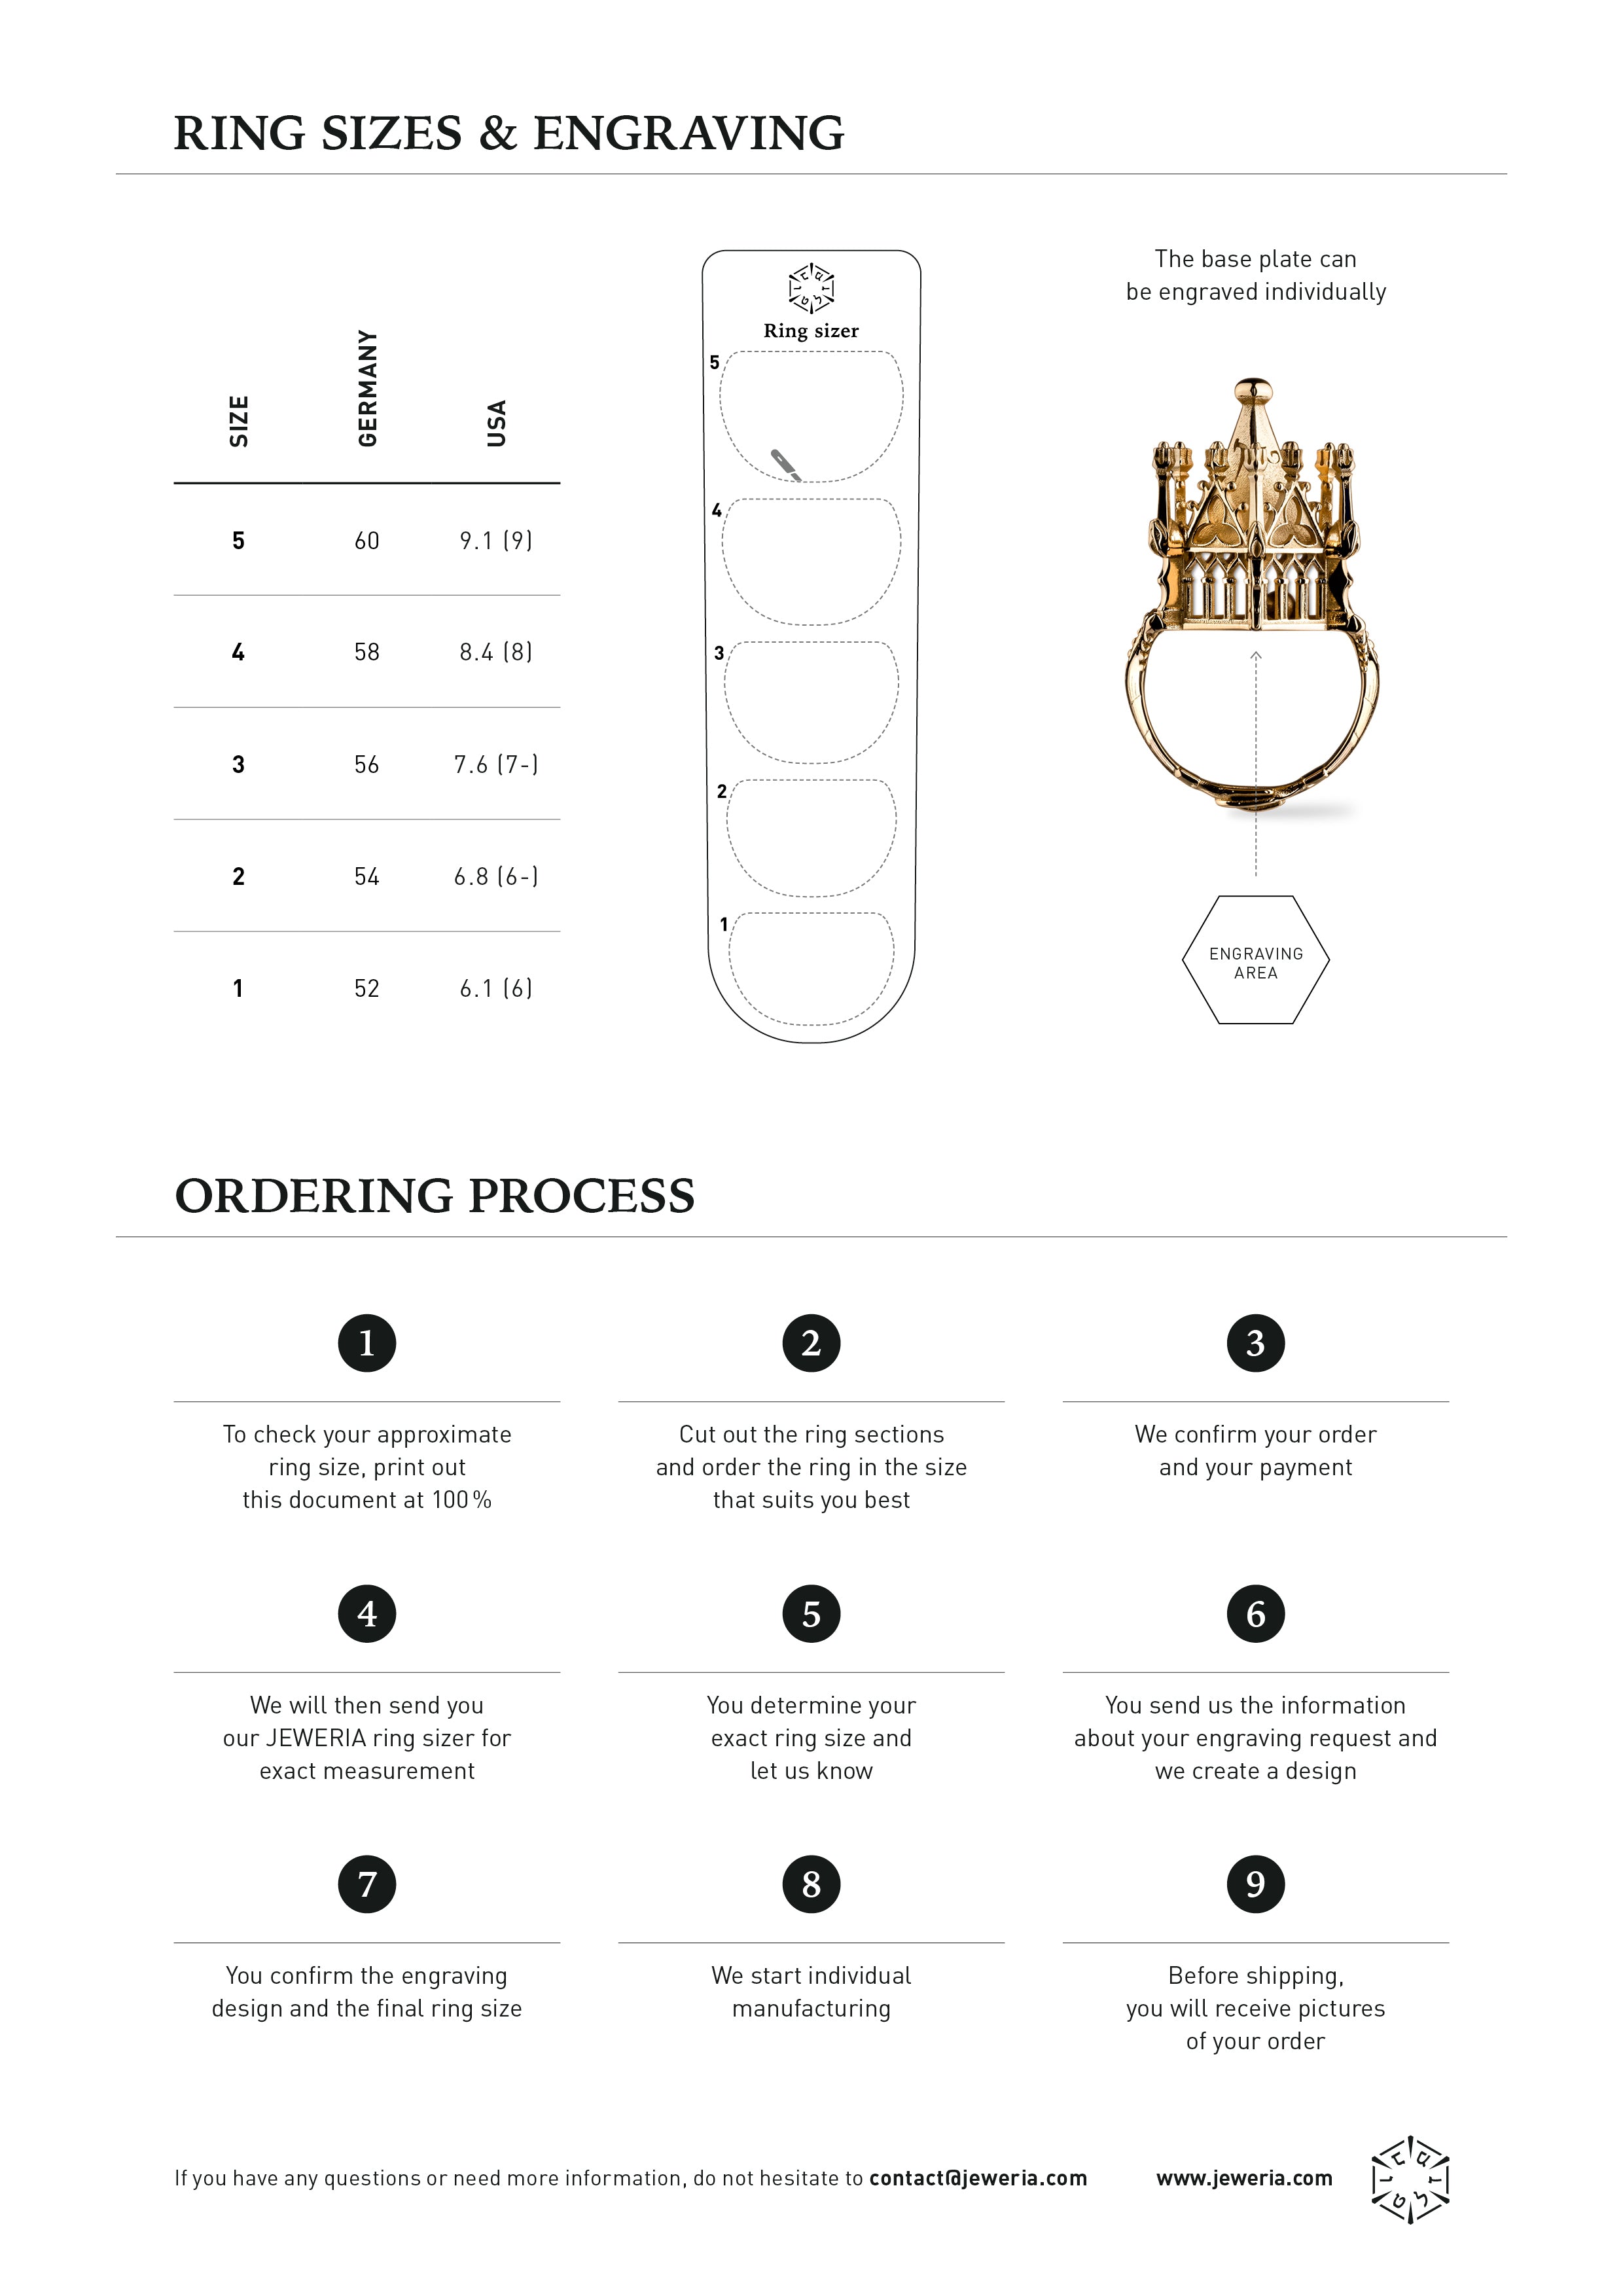 Size guide & ordering process